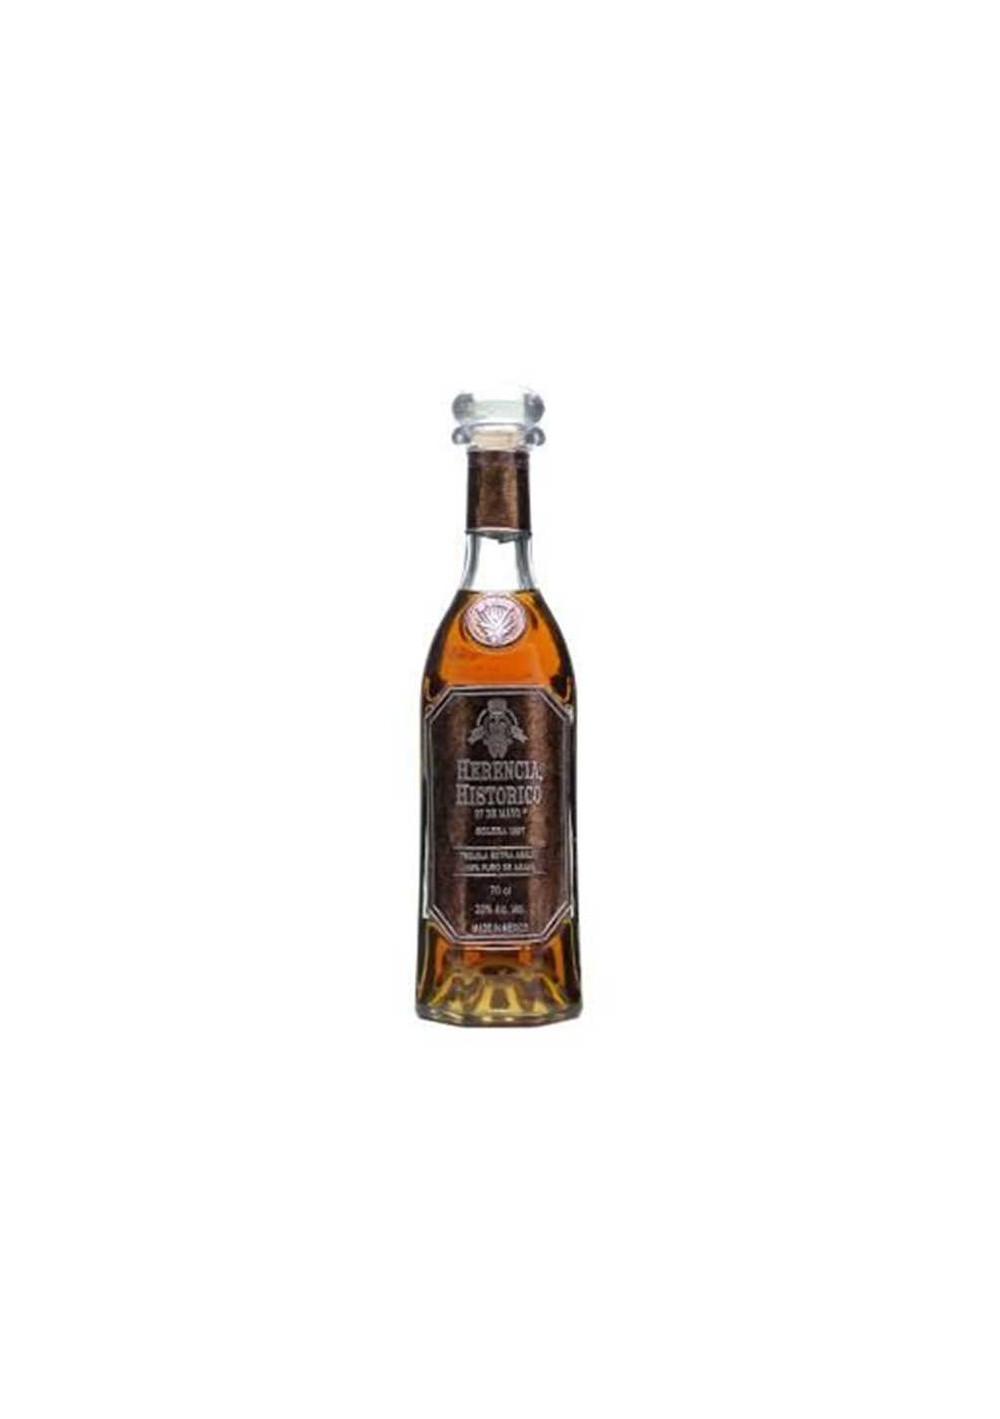 Herencia - Historico Tequila XO - 12 ans - (70cl)